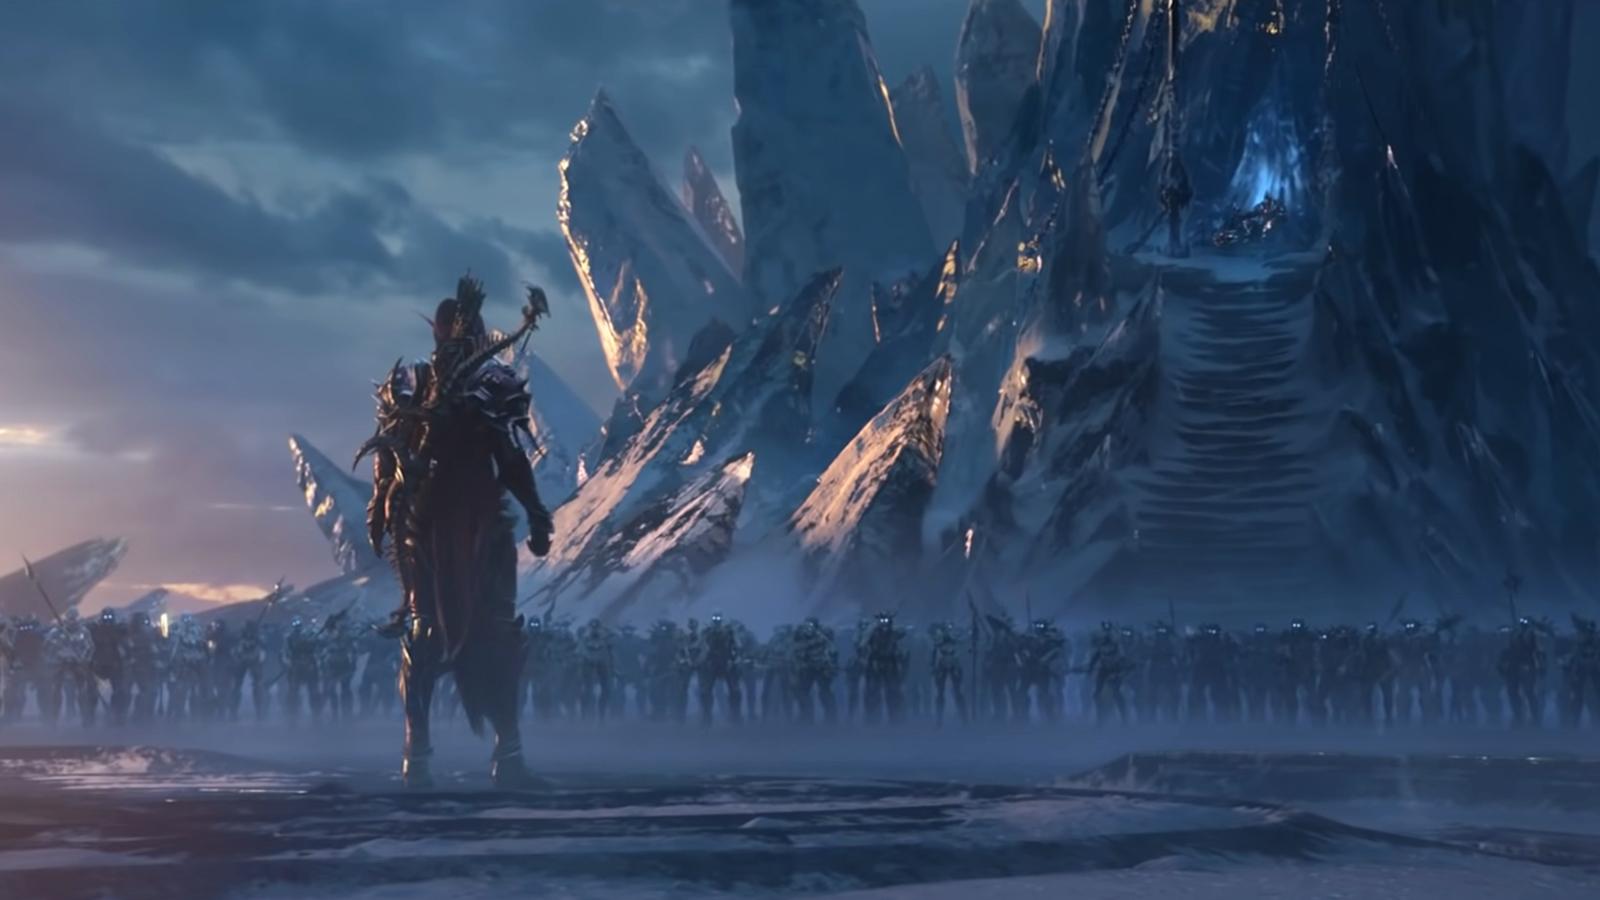 Sylvanas approaches The Lich King to open the Shadowlands.